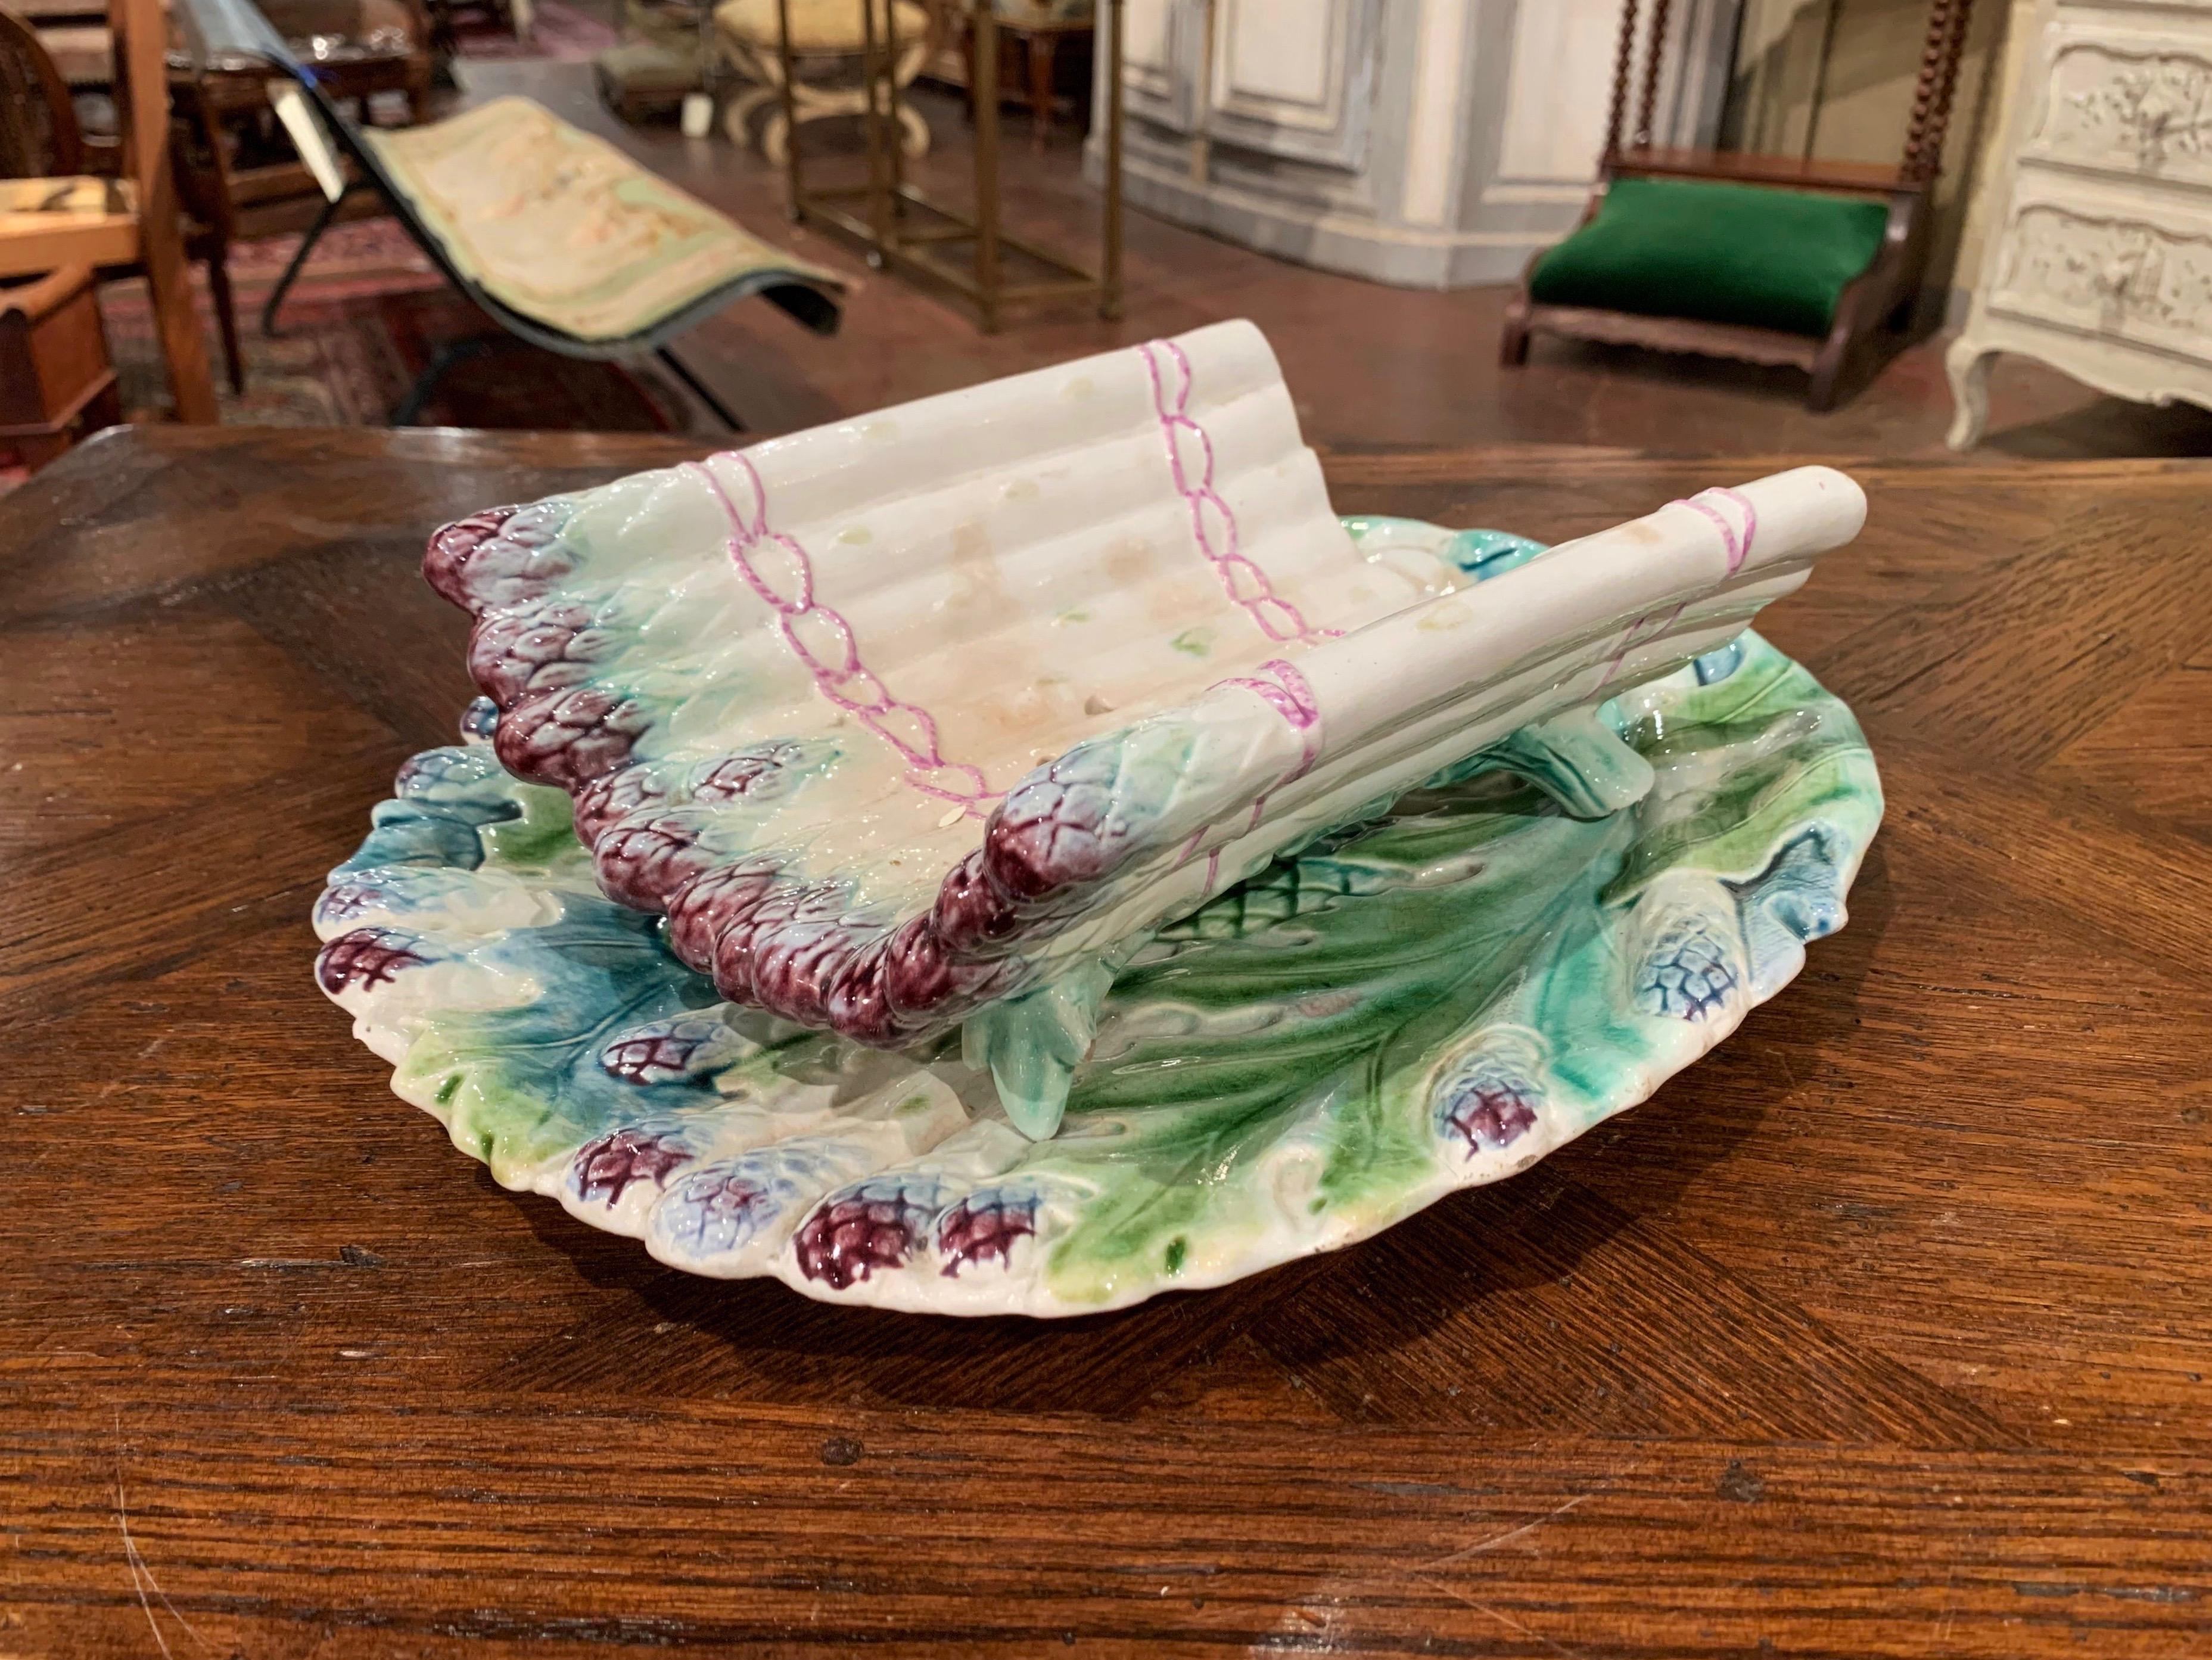 Dress up your dining room table or kitchen counter with this fine colorful hand painted Majolica asparagus dish. Sculpted in France, circa 1920, the two-piece set has a bottom platter with high relief asparagus and artichoke motifs, and a rounded